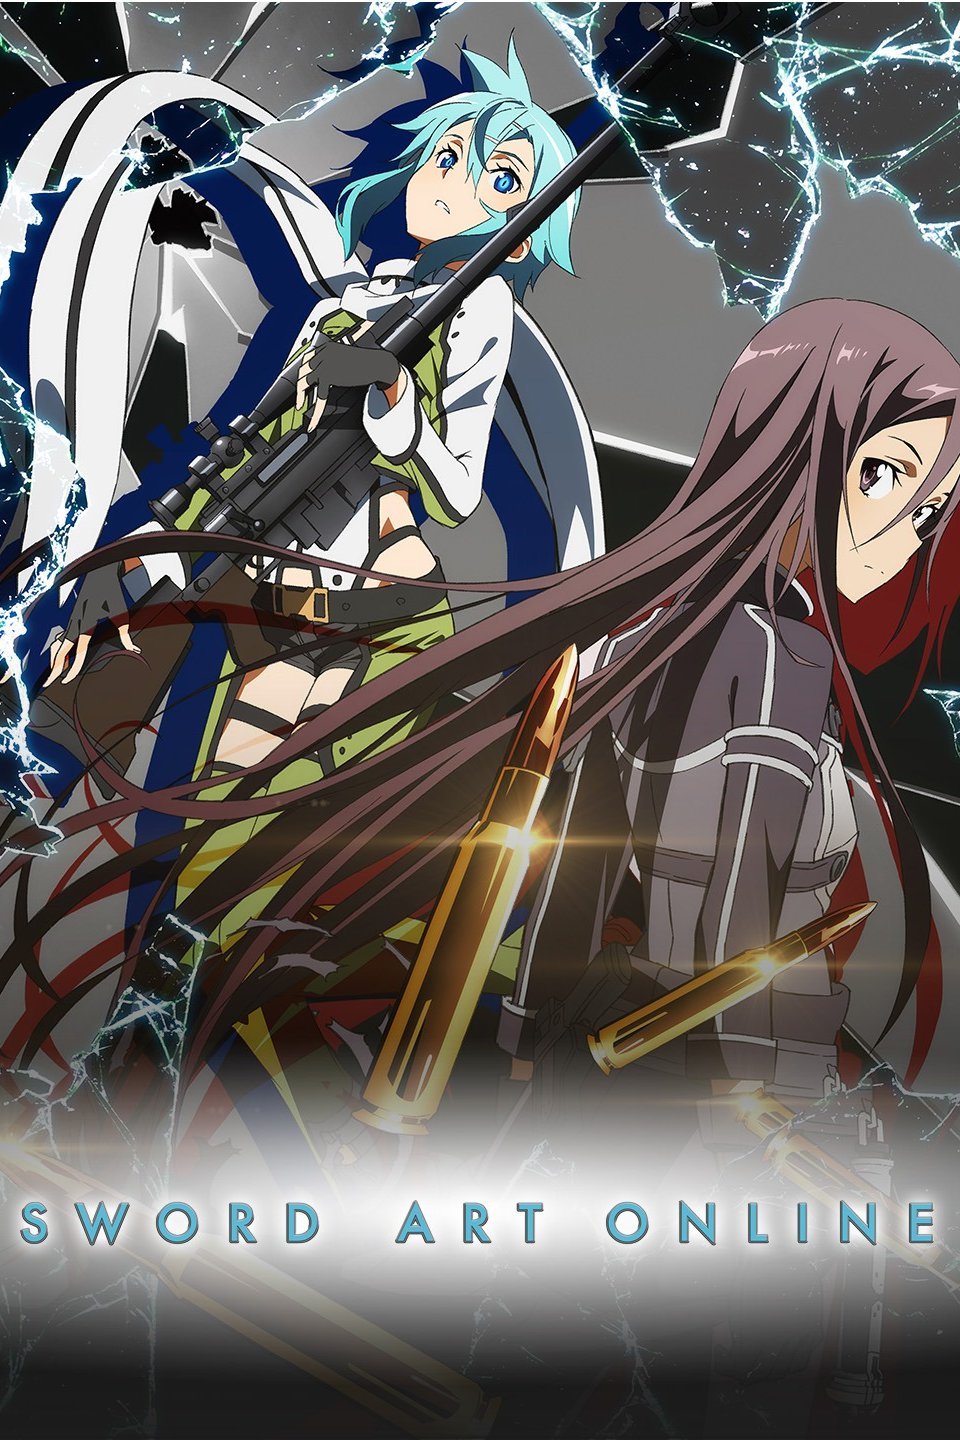 13 Anime Like Sword Art Online That You Need To Watch Right Now!